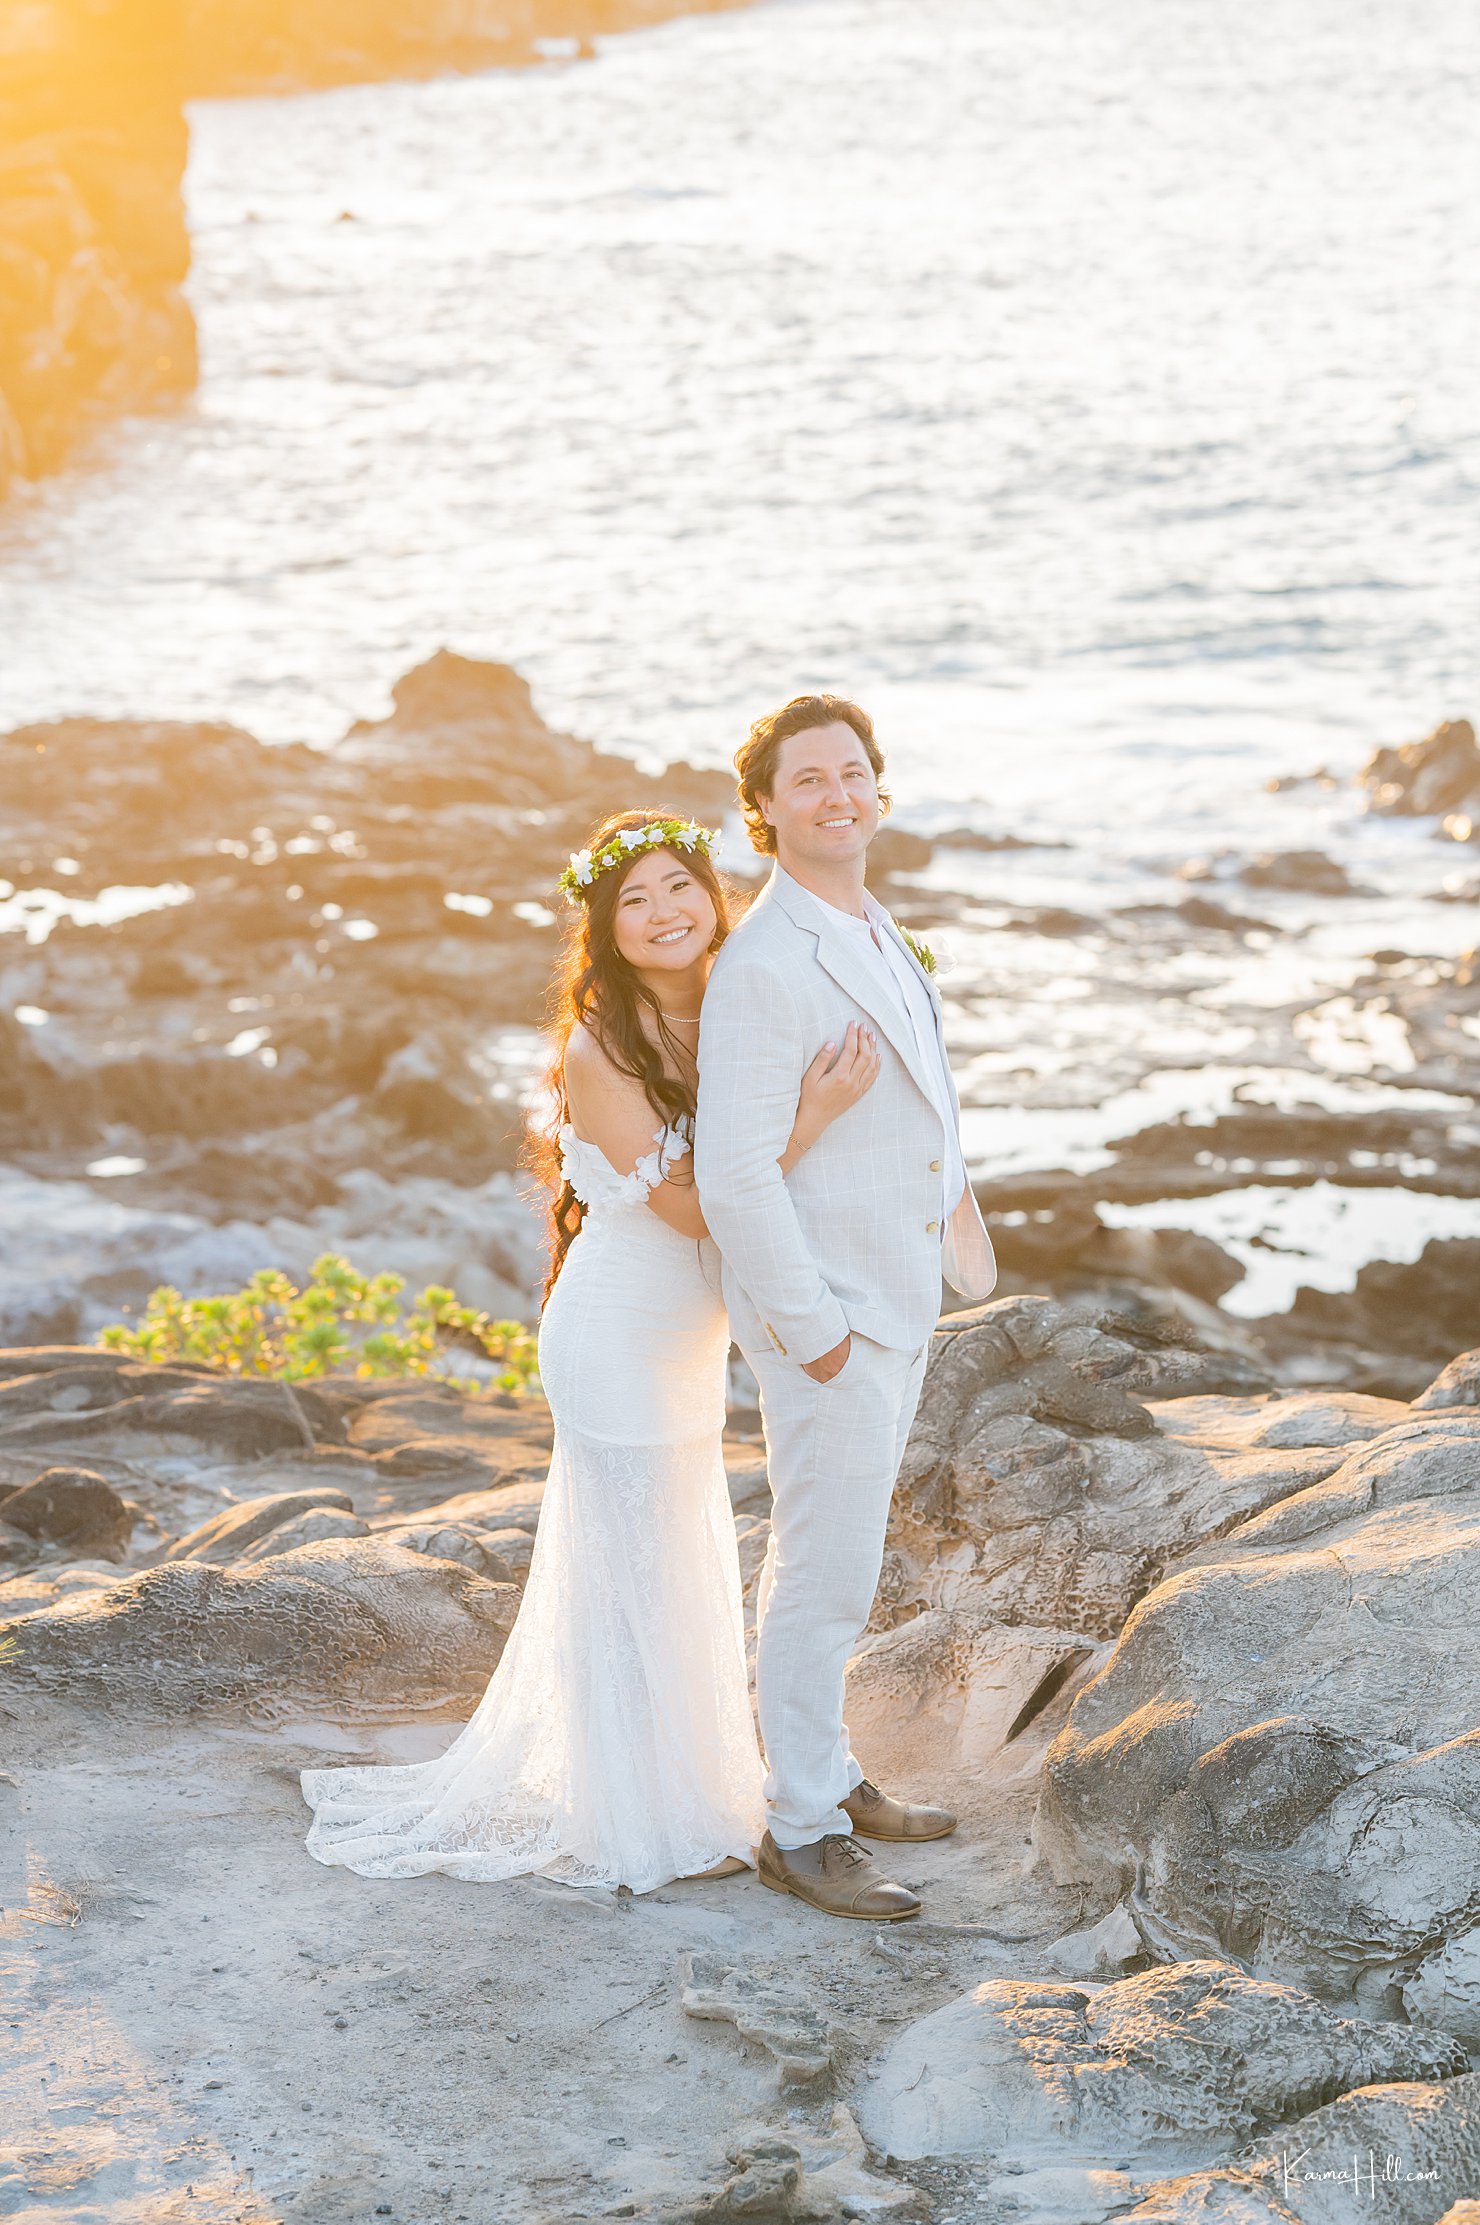 Inspiration for Maui Elopement Photography